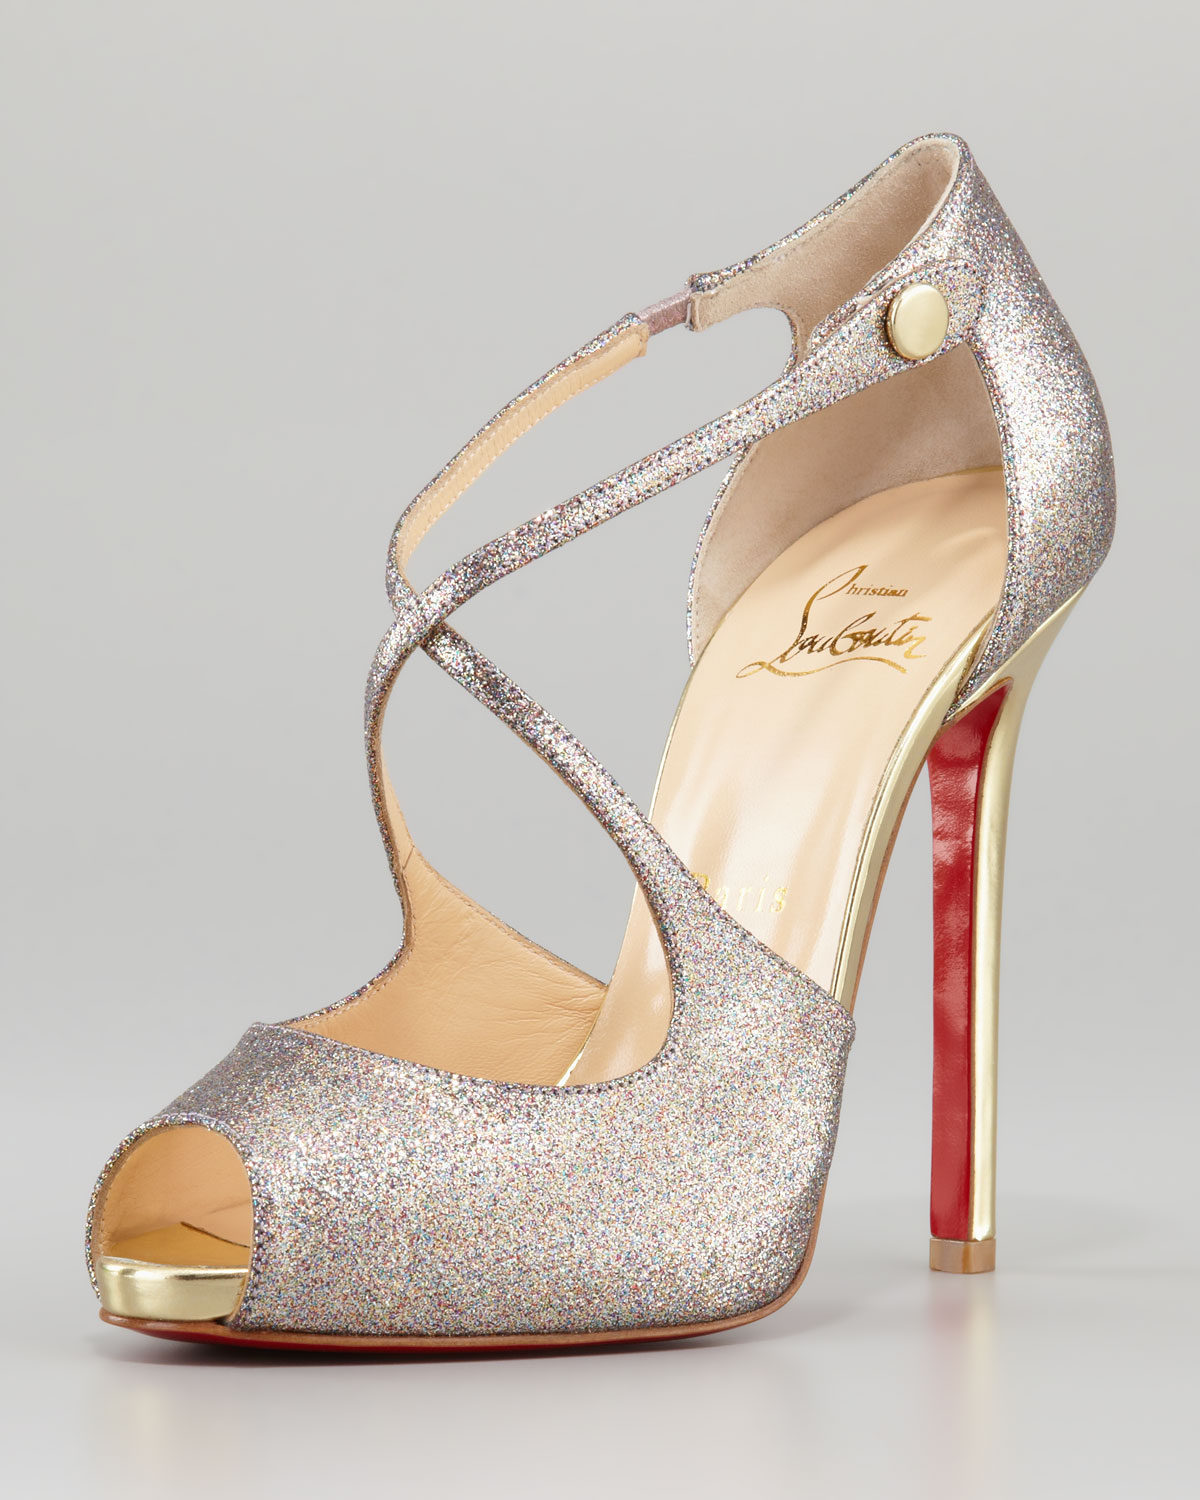 red bottom shoes with spikes for men - Christian louboutin Wrap Glitter Peeptoe Red Sole Pump in Gold ...